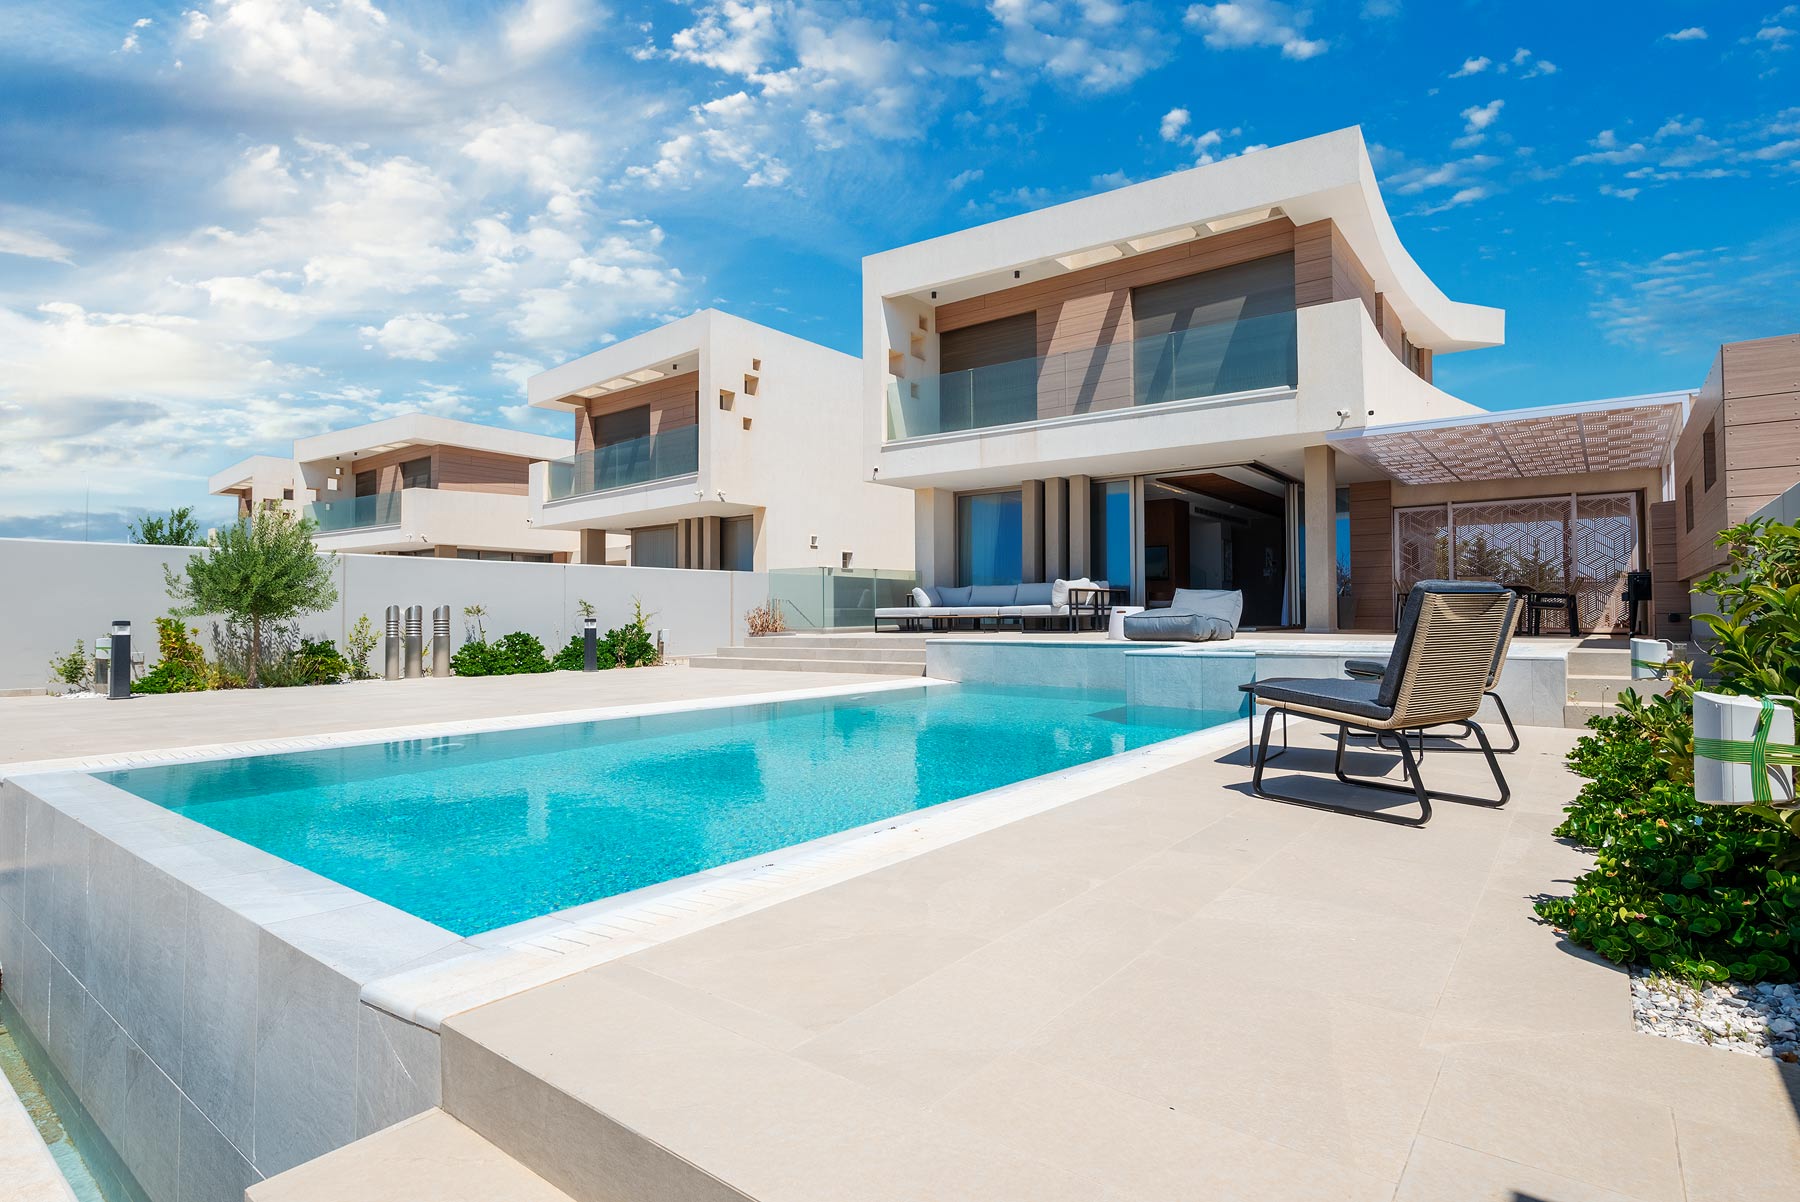 Waking up to the sea view In your modern villa in Cyprus